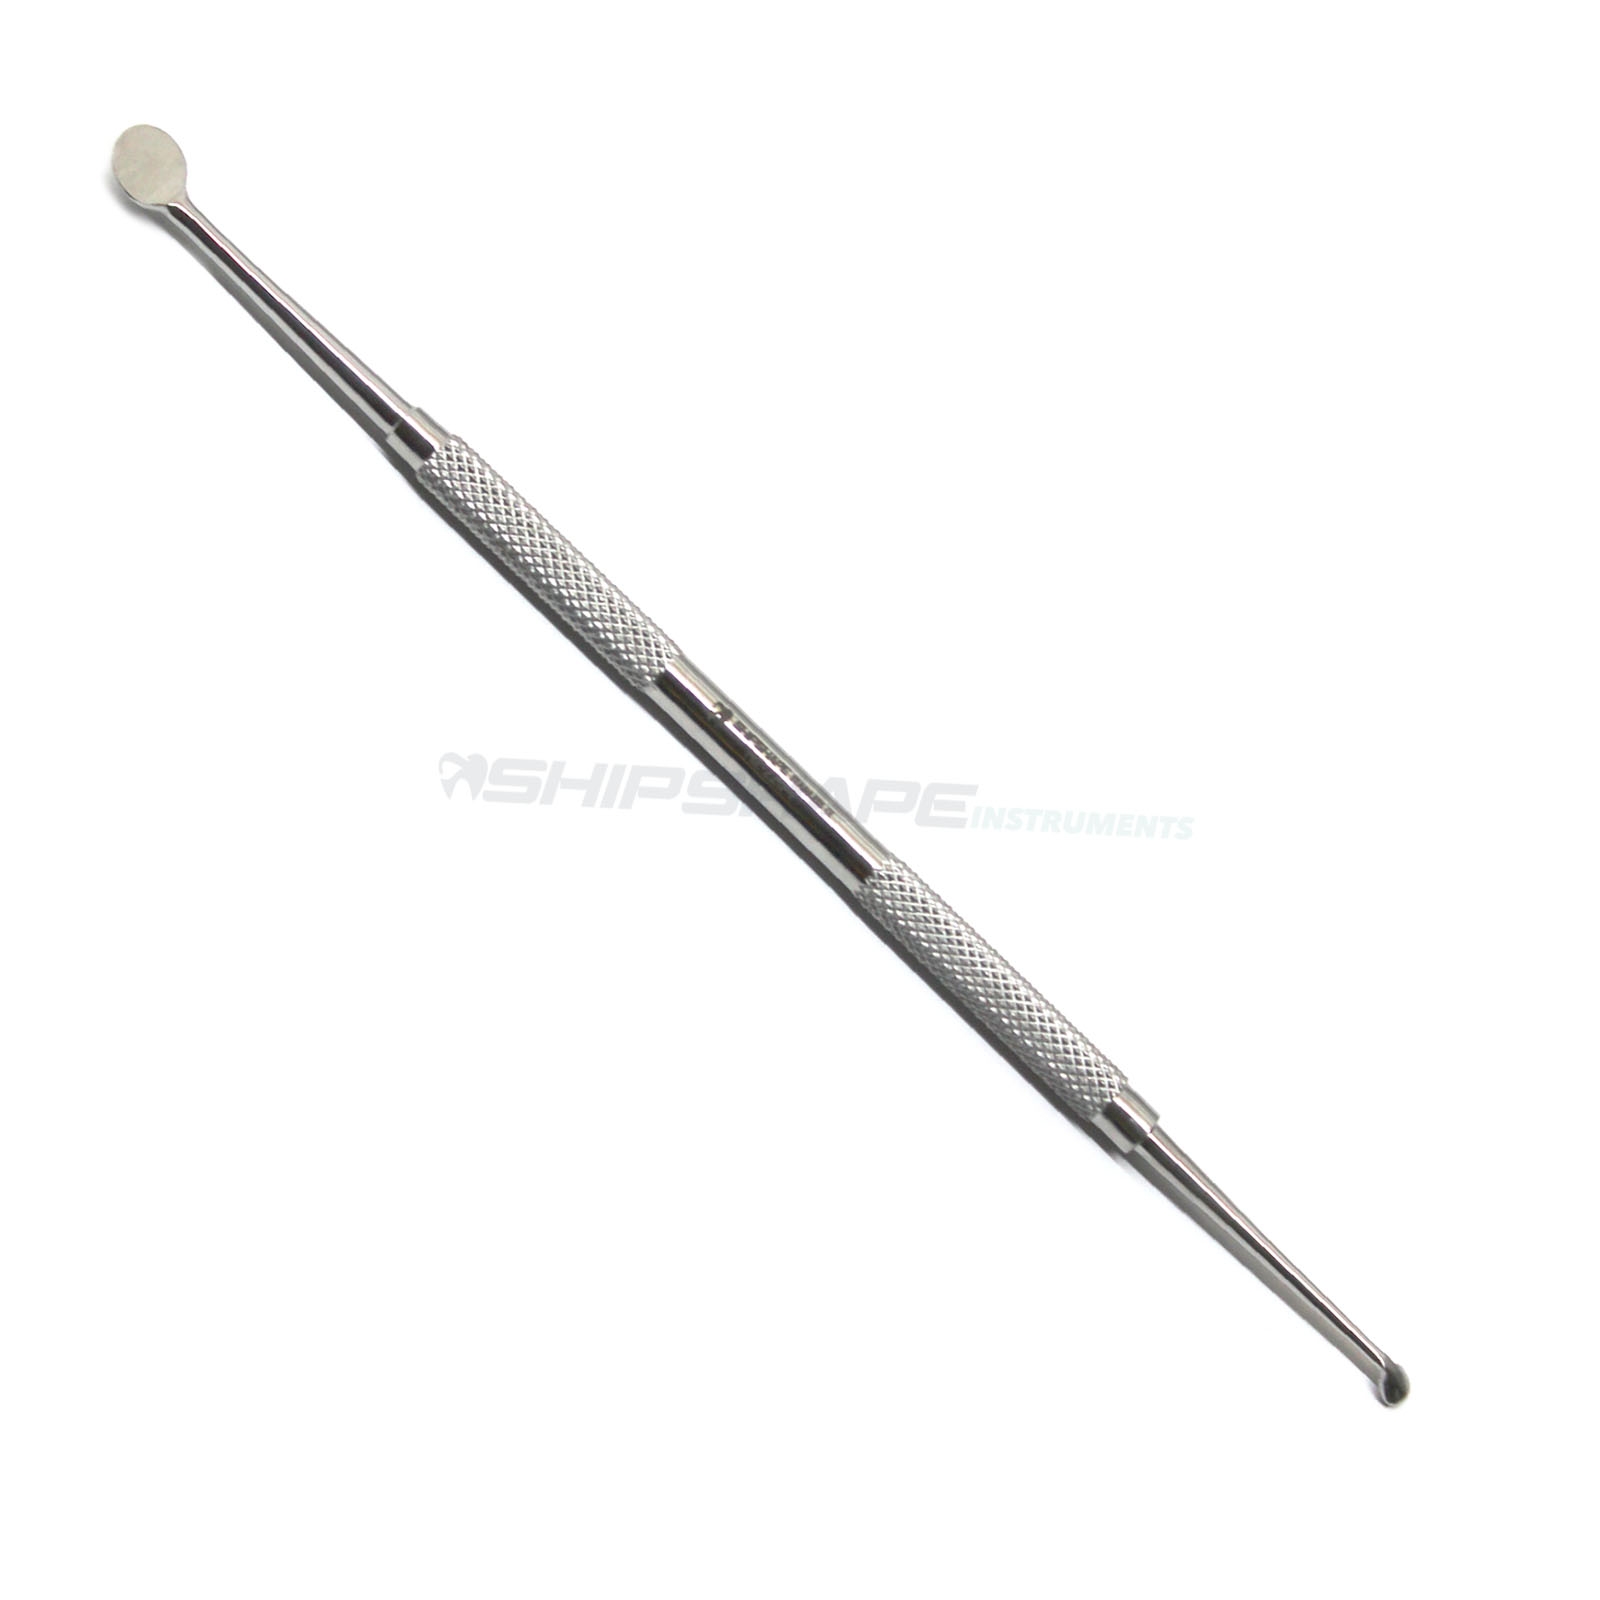 Periosteal Curette 2/4 Molt Periosteal Curette 3.5mm/7.5mm Ends Shipshape Periosteal Elevator-0